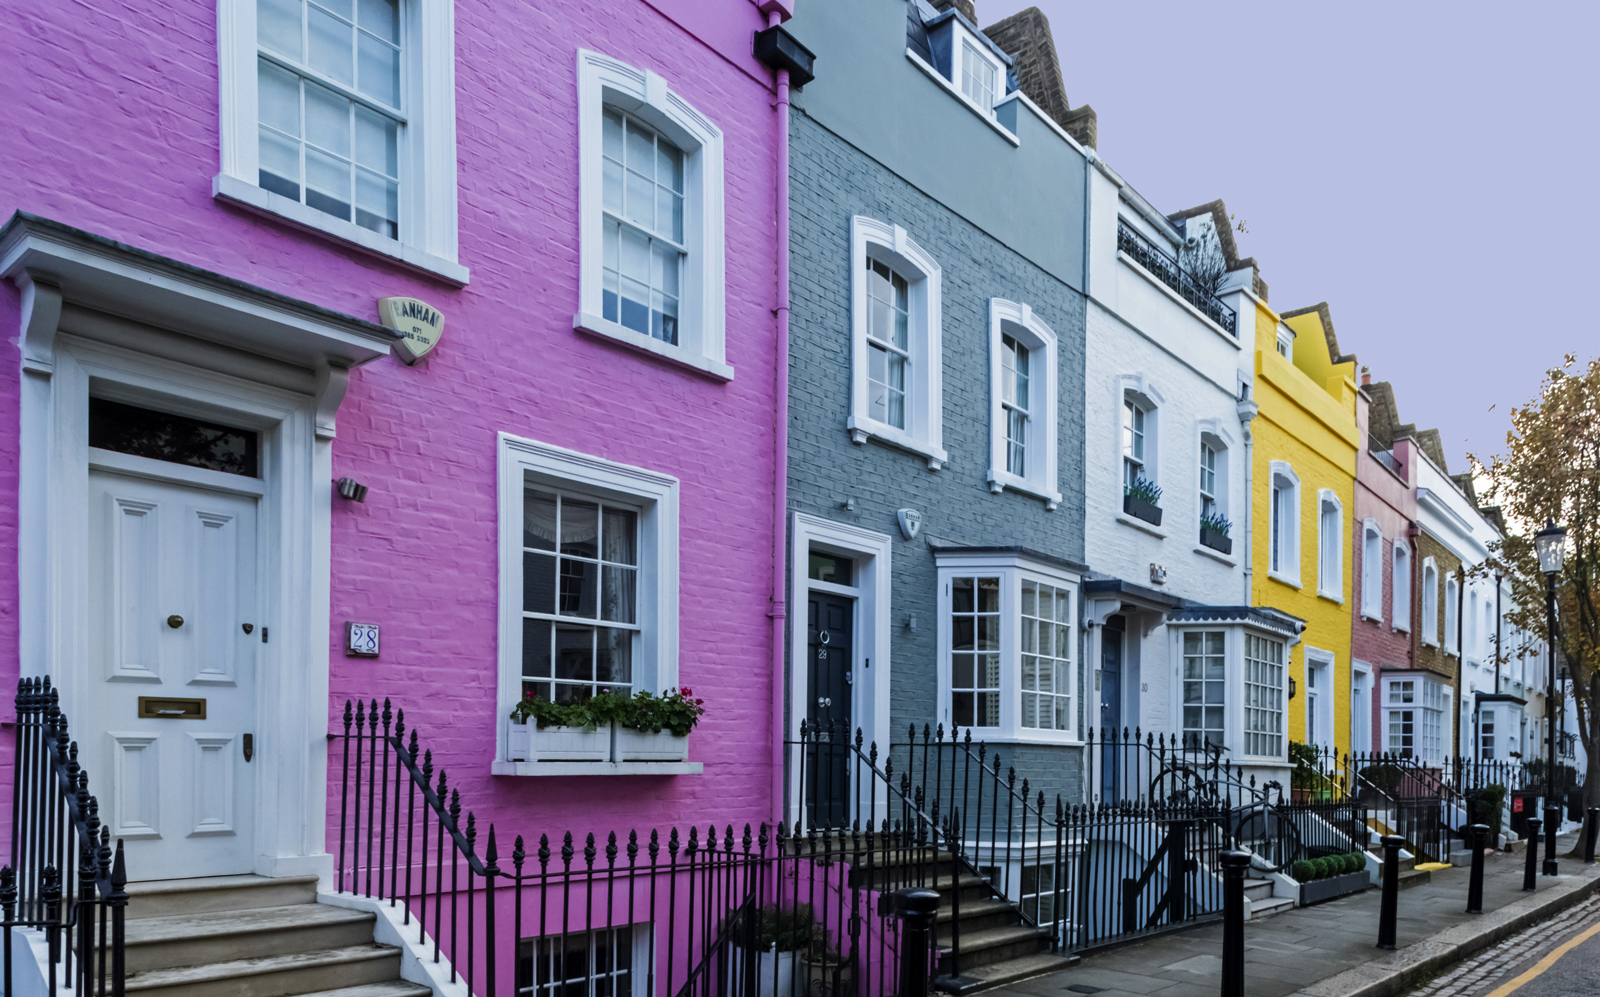 The average price of a London home rose above 500,000 pounds, or roughly $685,000, for the first time. (Getty)